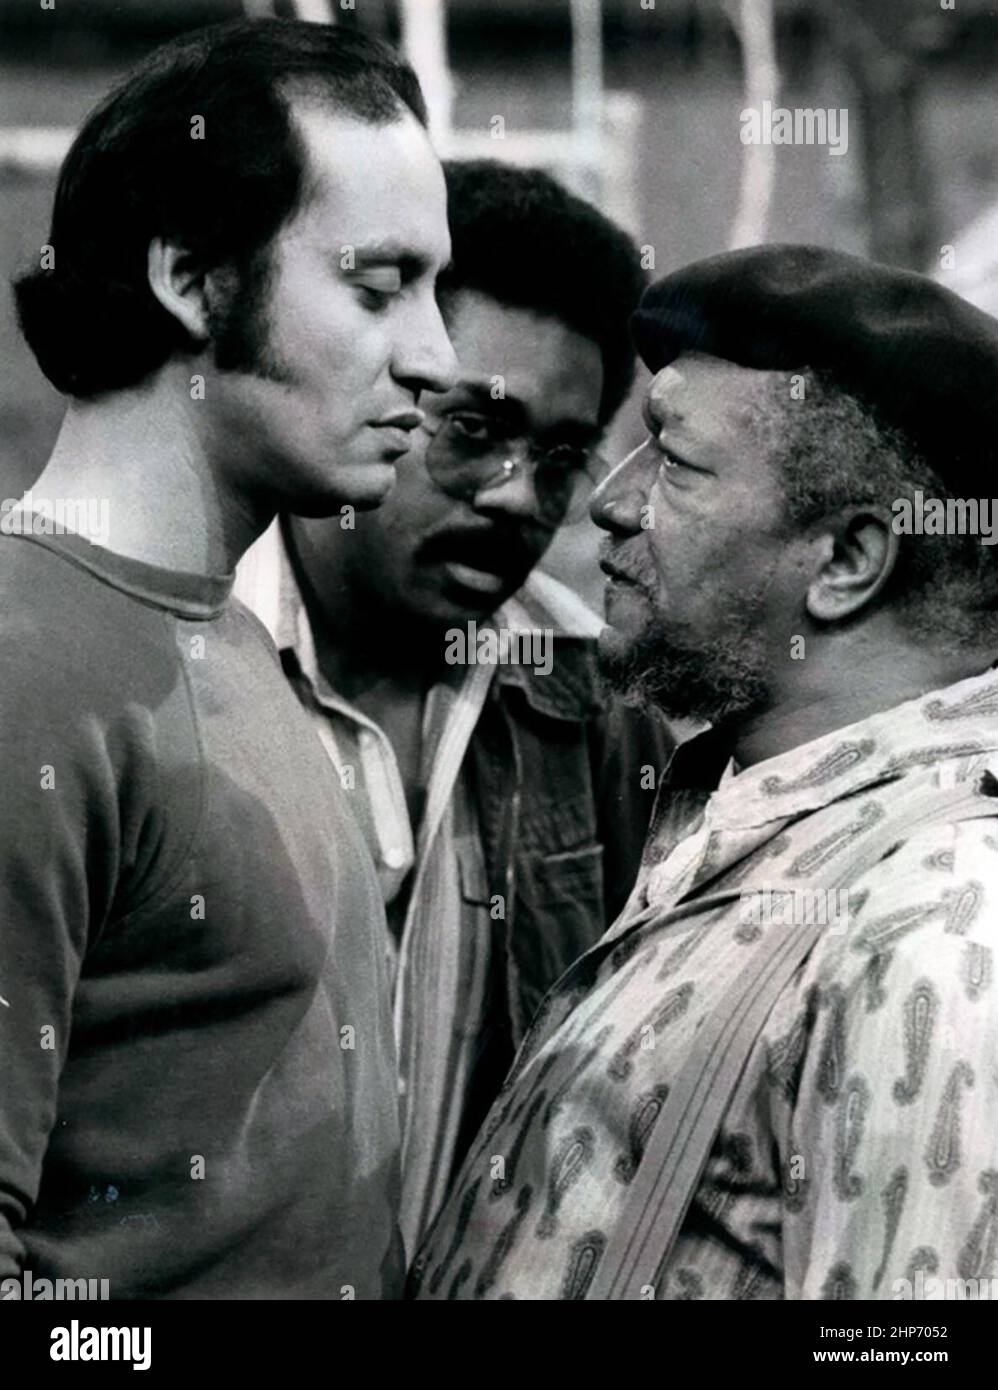 Publicity photo of Redd Foxx, Demond Wilson and Gregory Sierra in Sanford and Son ca. 1974 Stock Photo